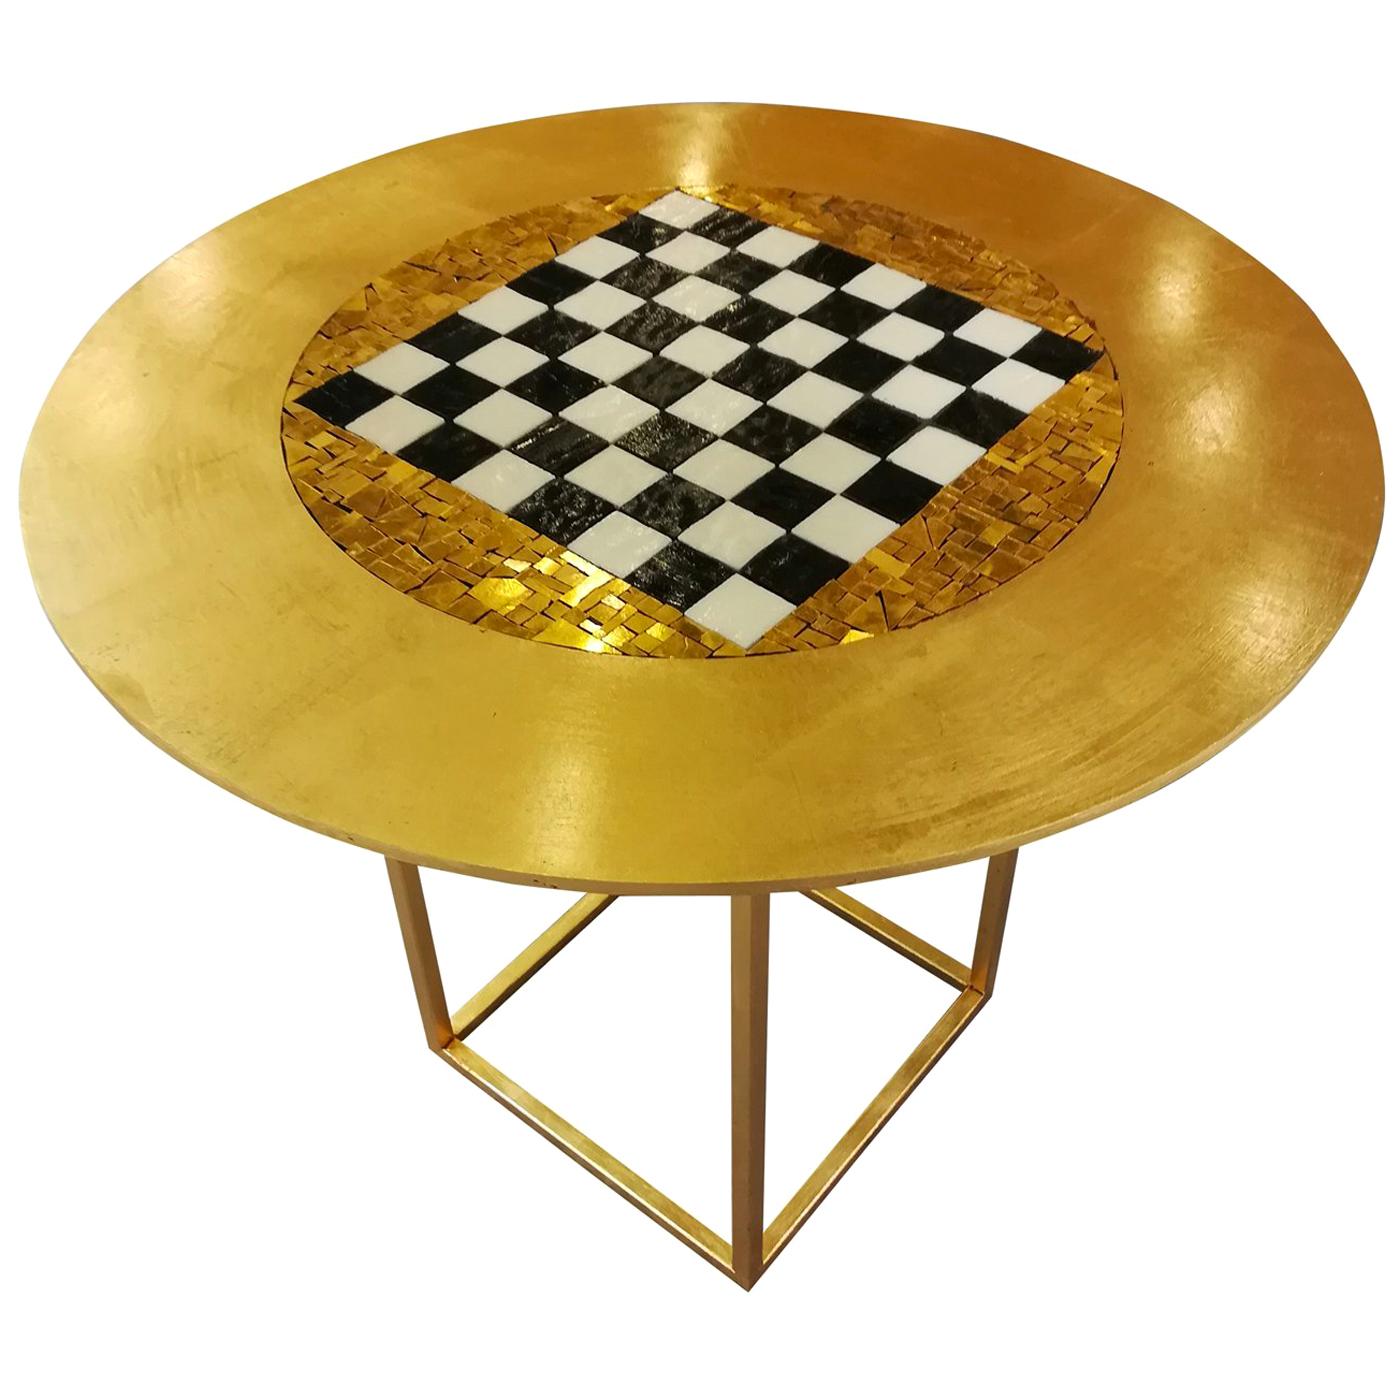 Gold Chessboard Table